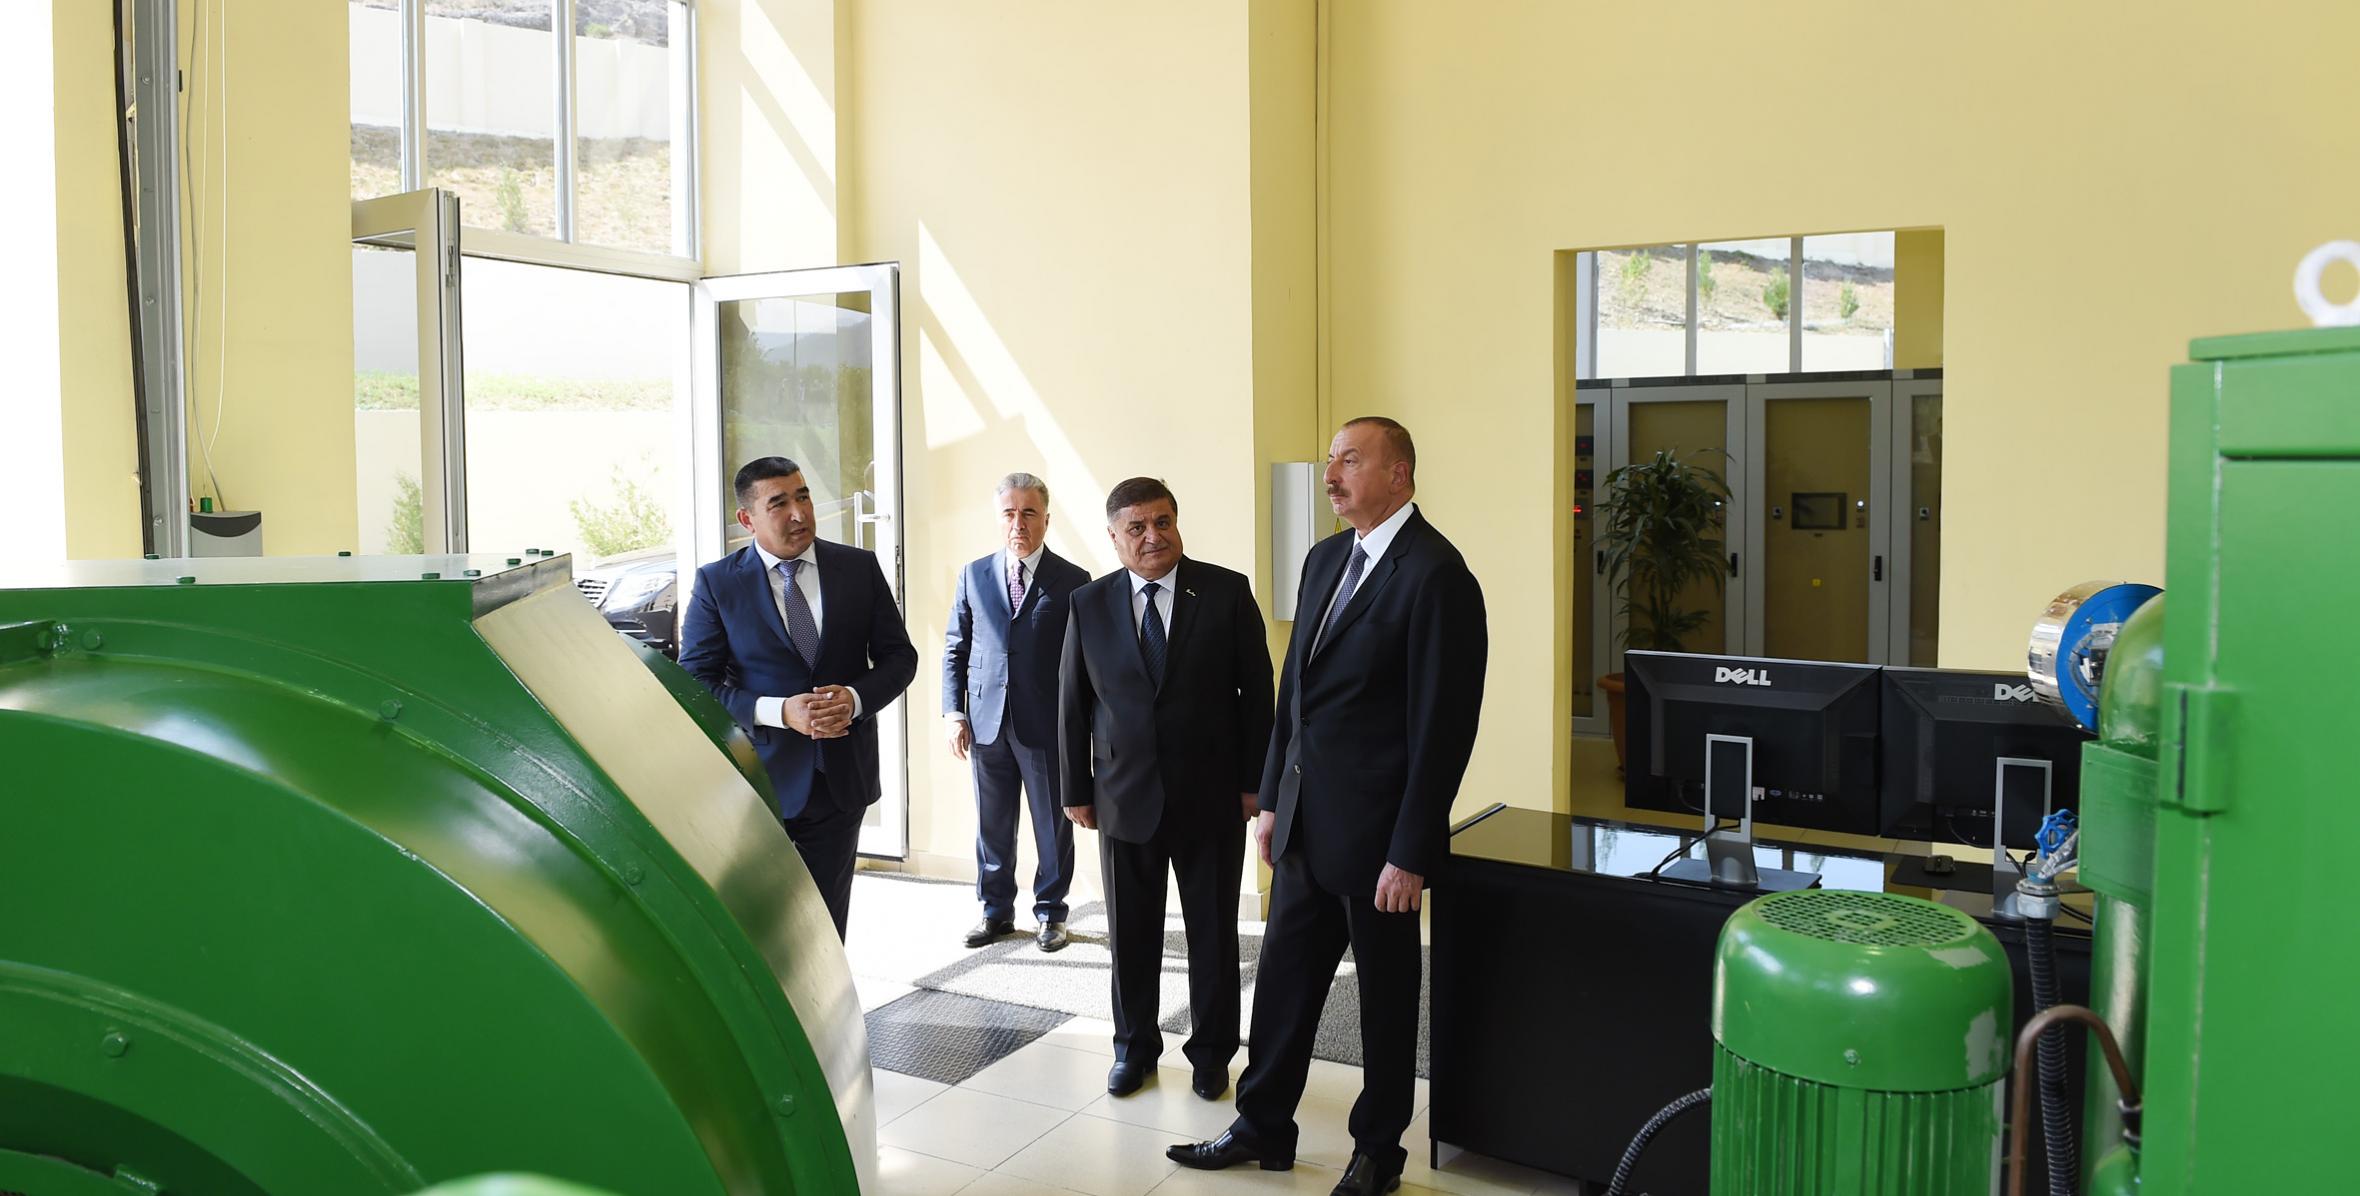 Ilham Aliyev launched Chichakli Hydroelectric Power Station after major overhaul